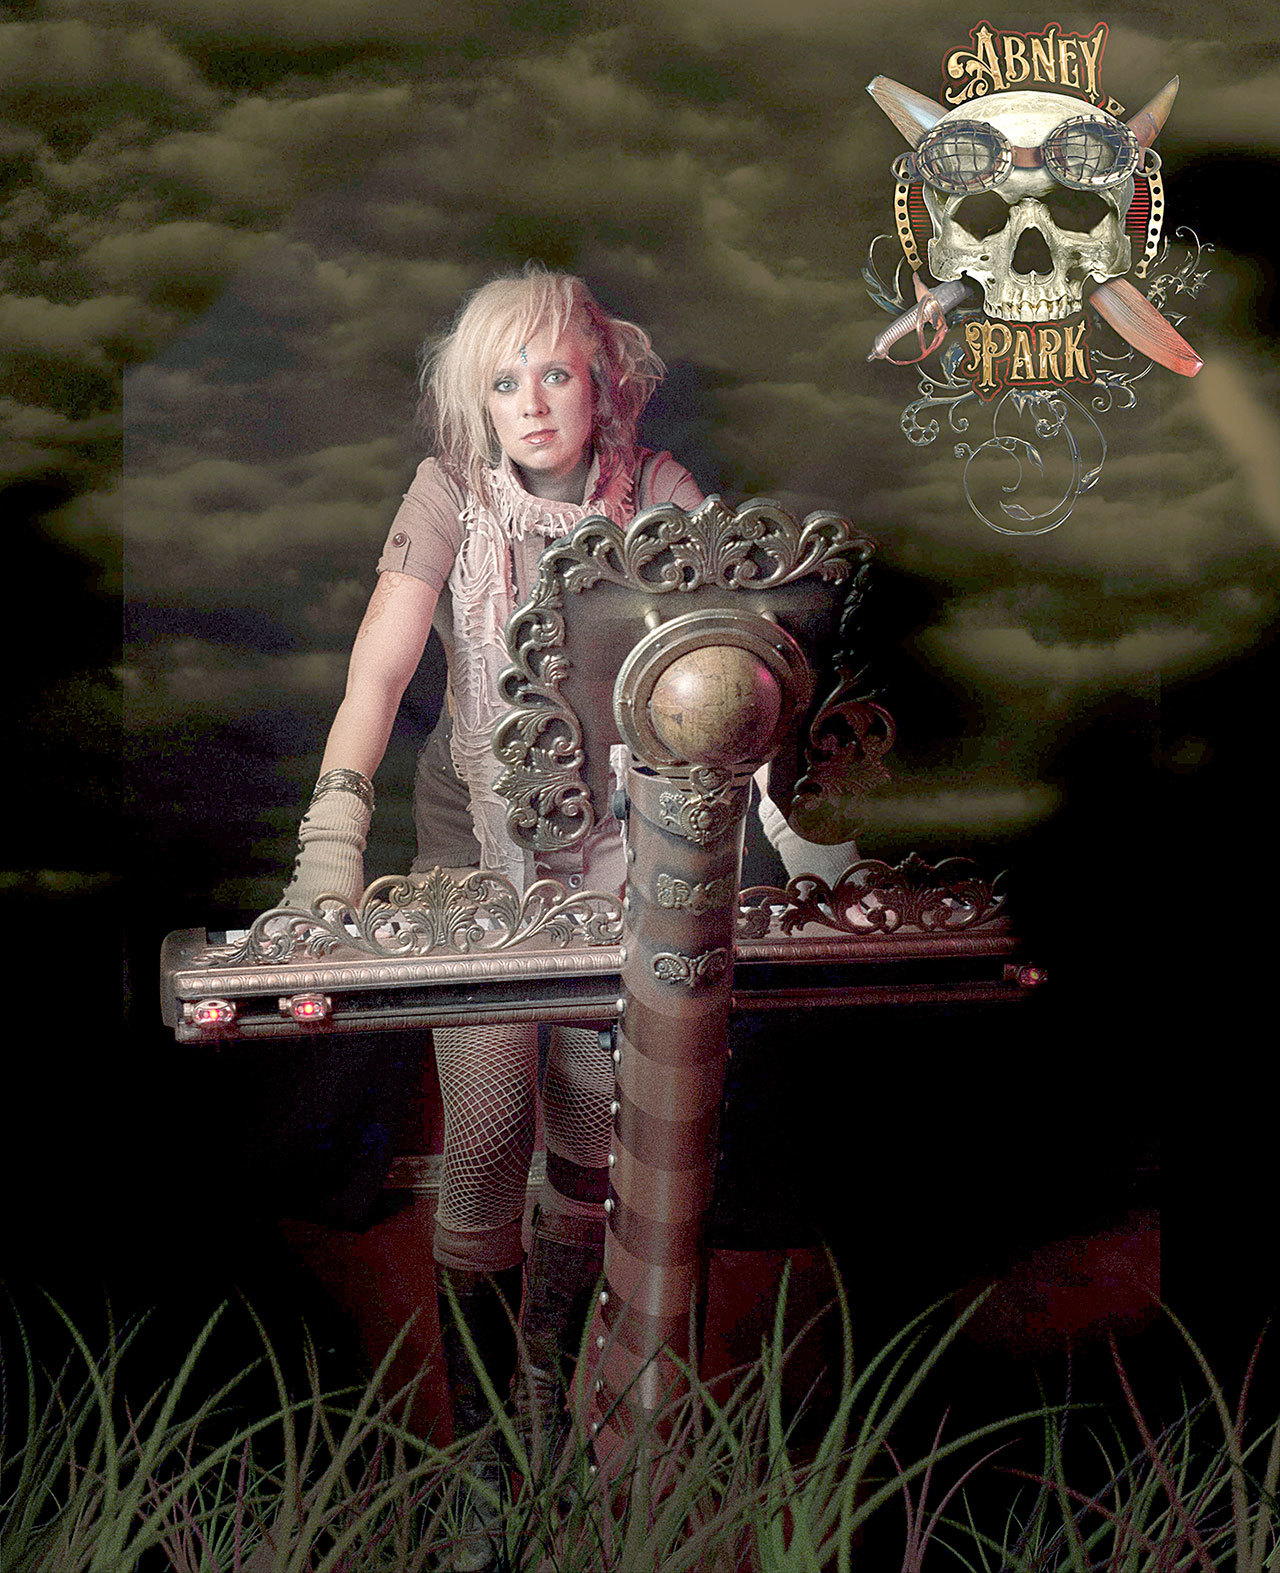 Pianist Kristina Erickson, seen here, completes the Abney Park lineup. — Abney Park.